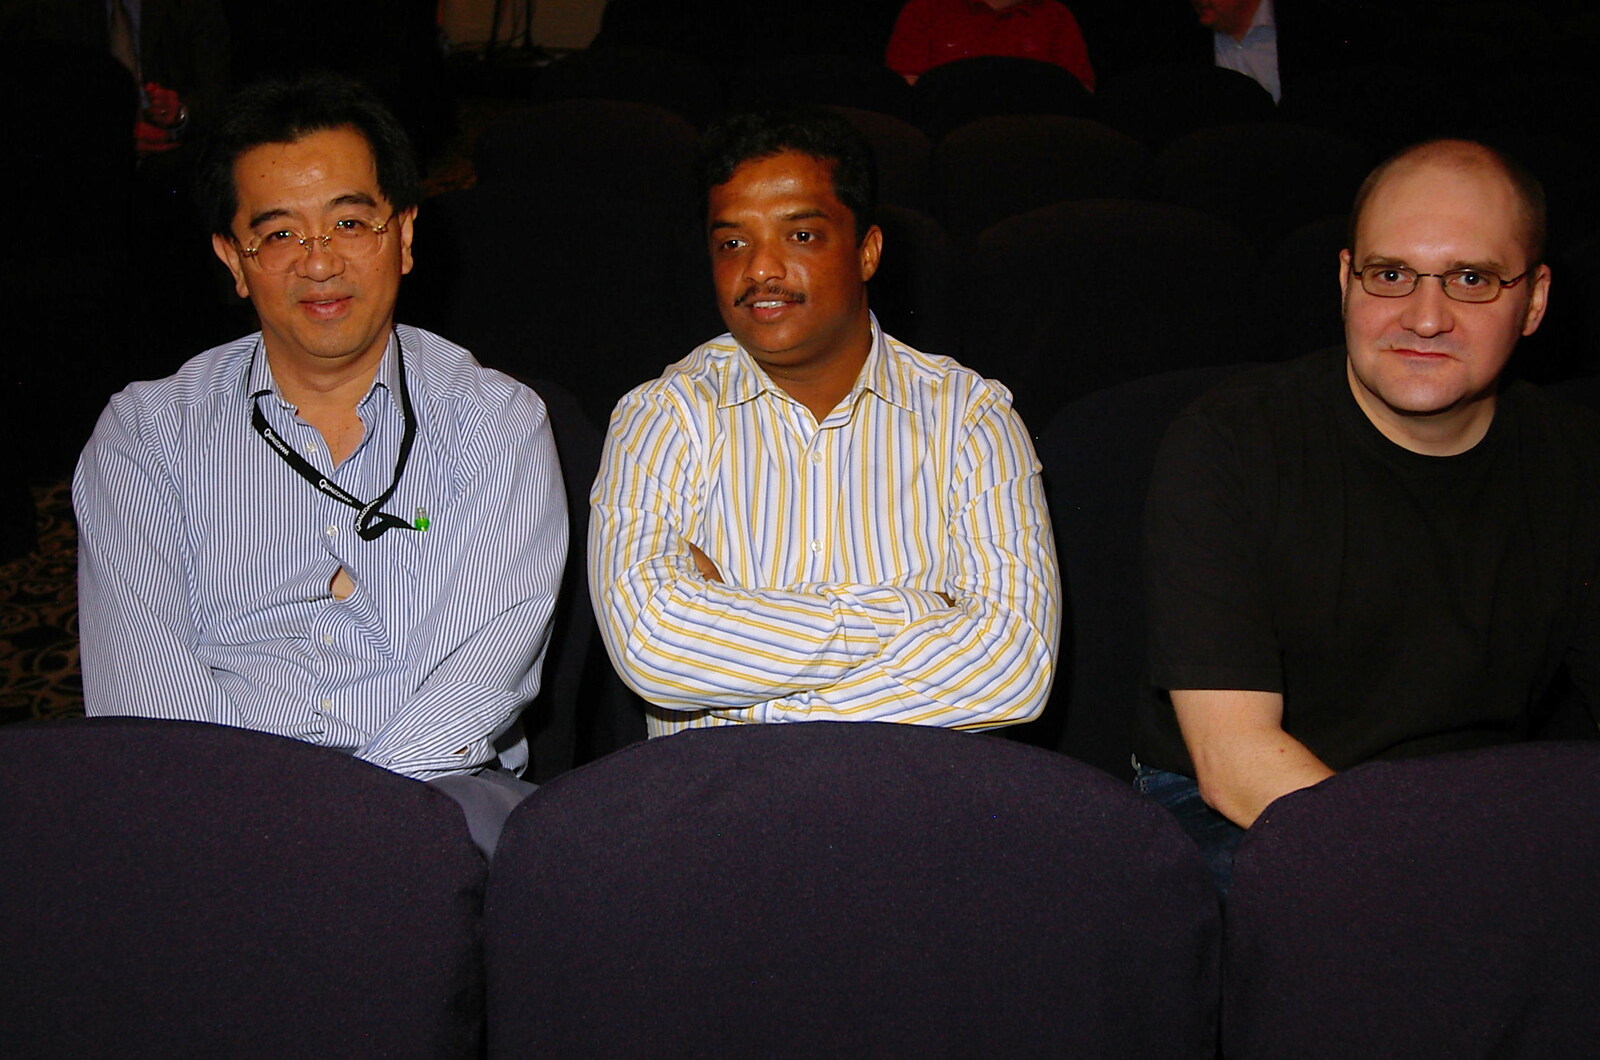 Like people in a cinema: James, Vijay and Francis from Qualcomm Europe All-Hands at the Berkeley Hotel, London - 9th November 2005